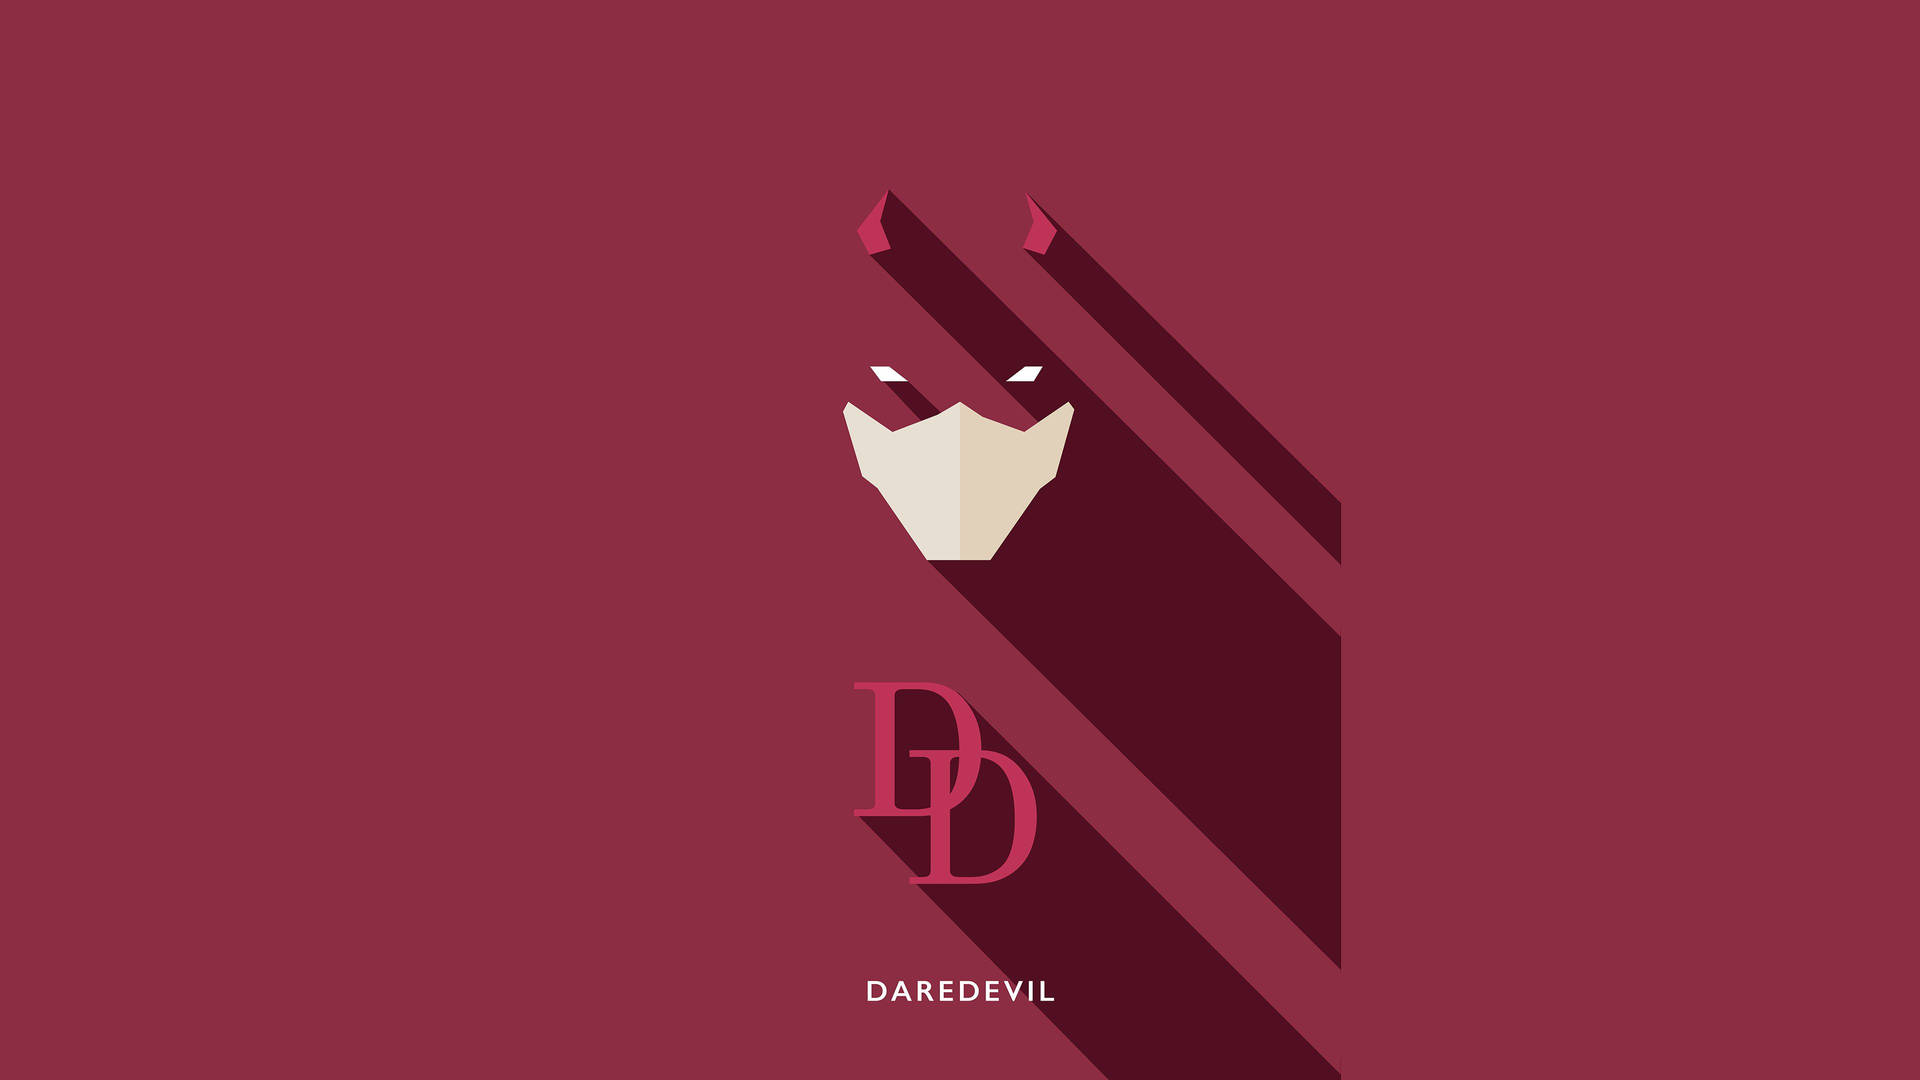 Maroon Daredevil Abstract Background